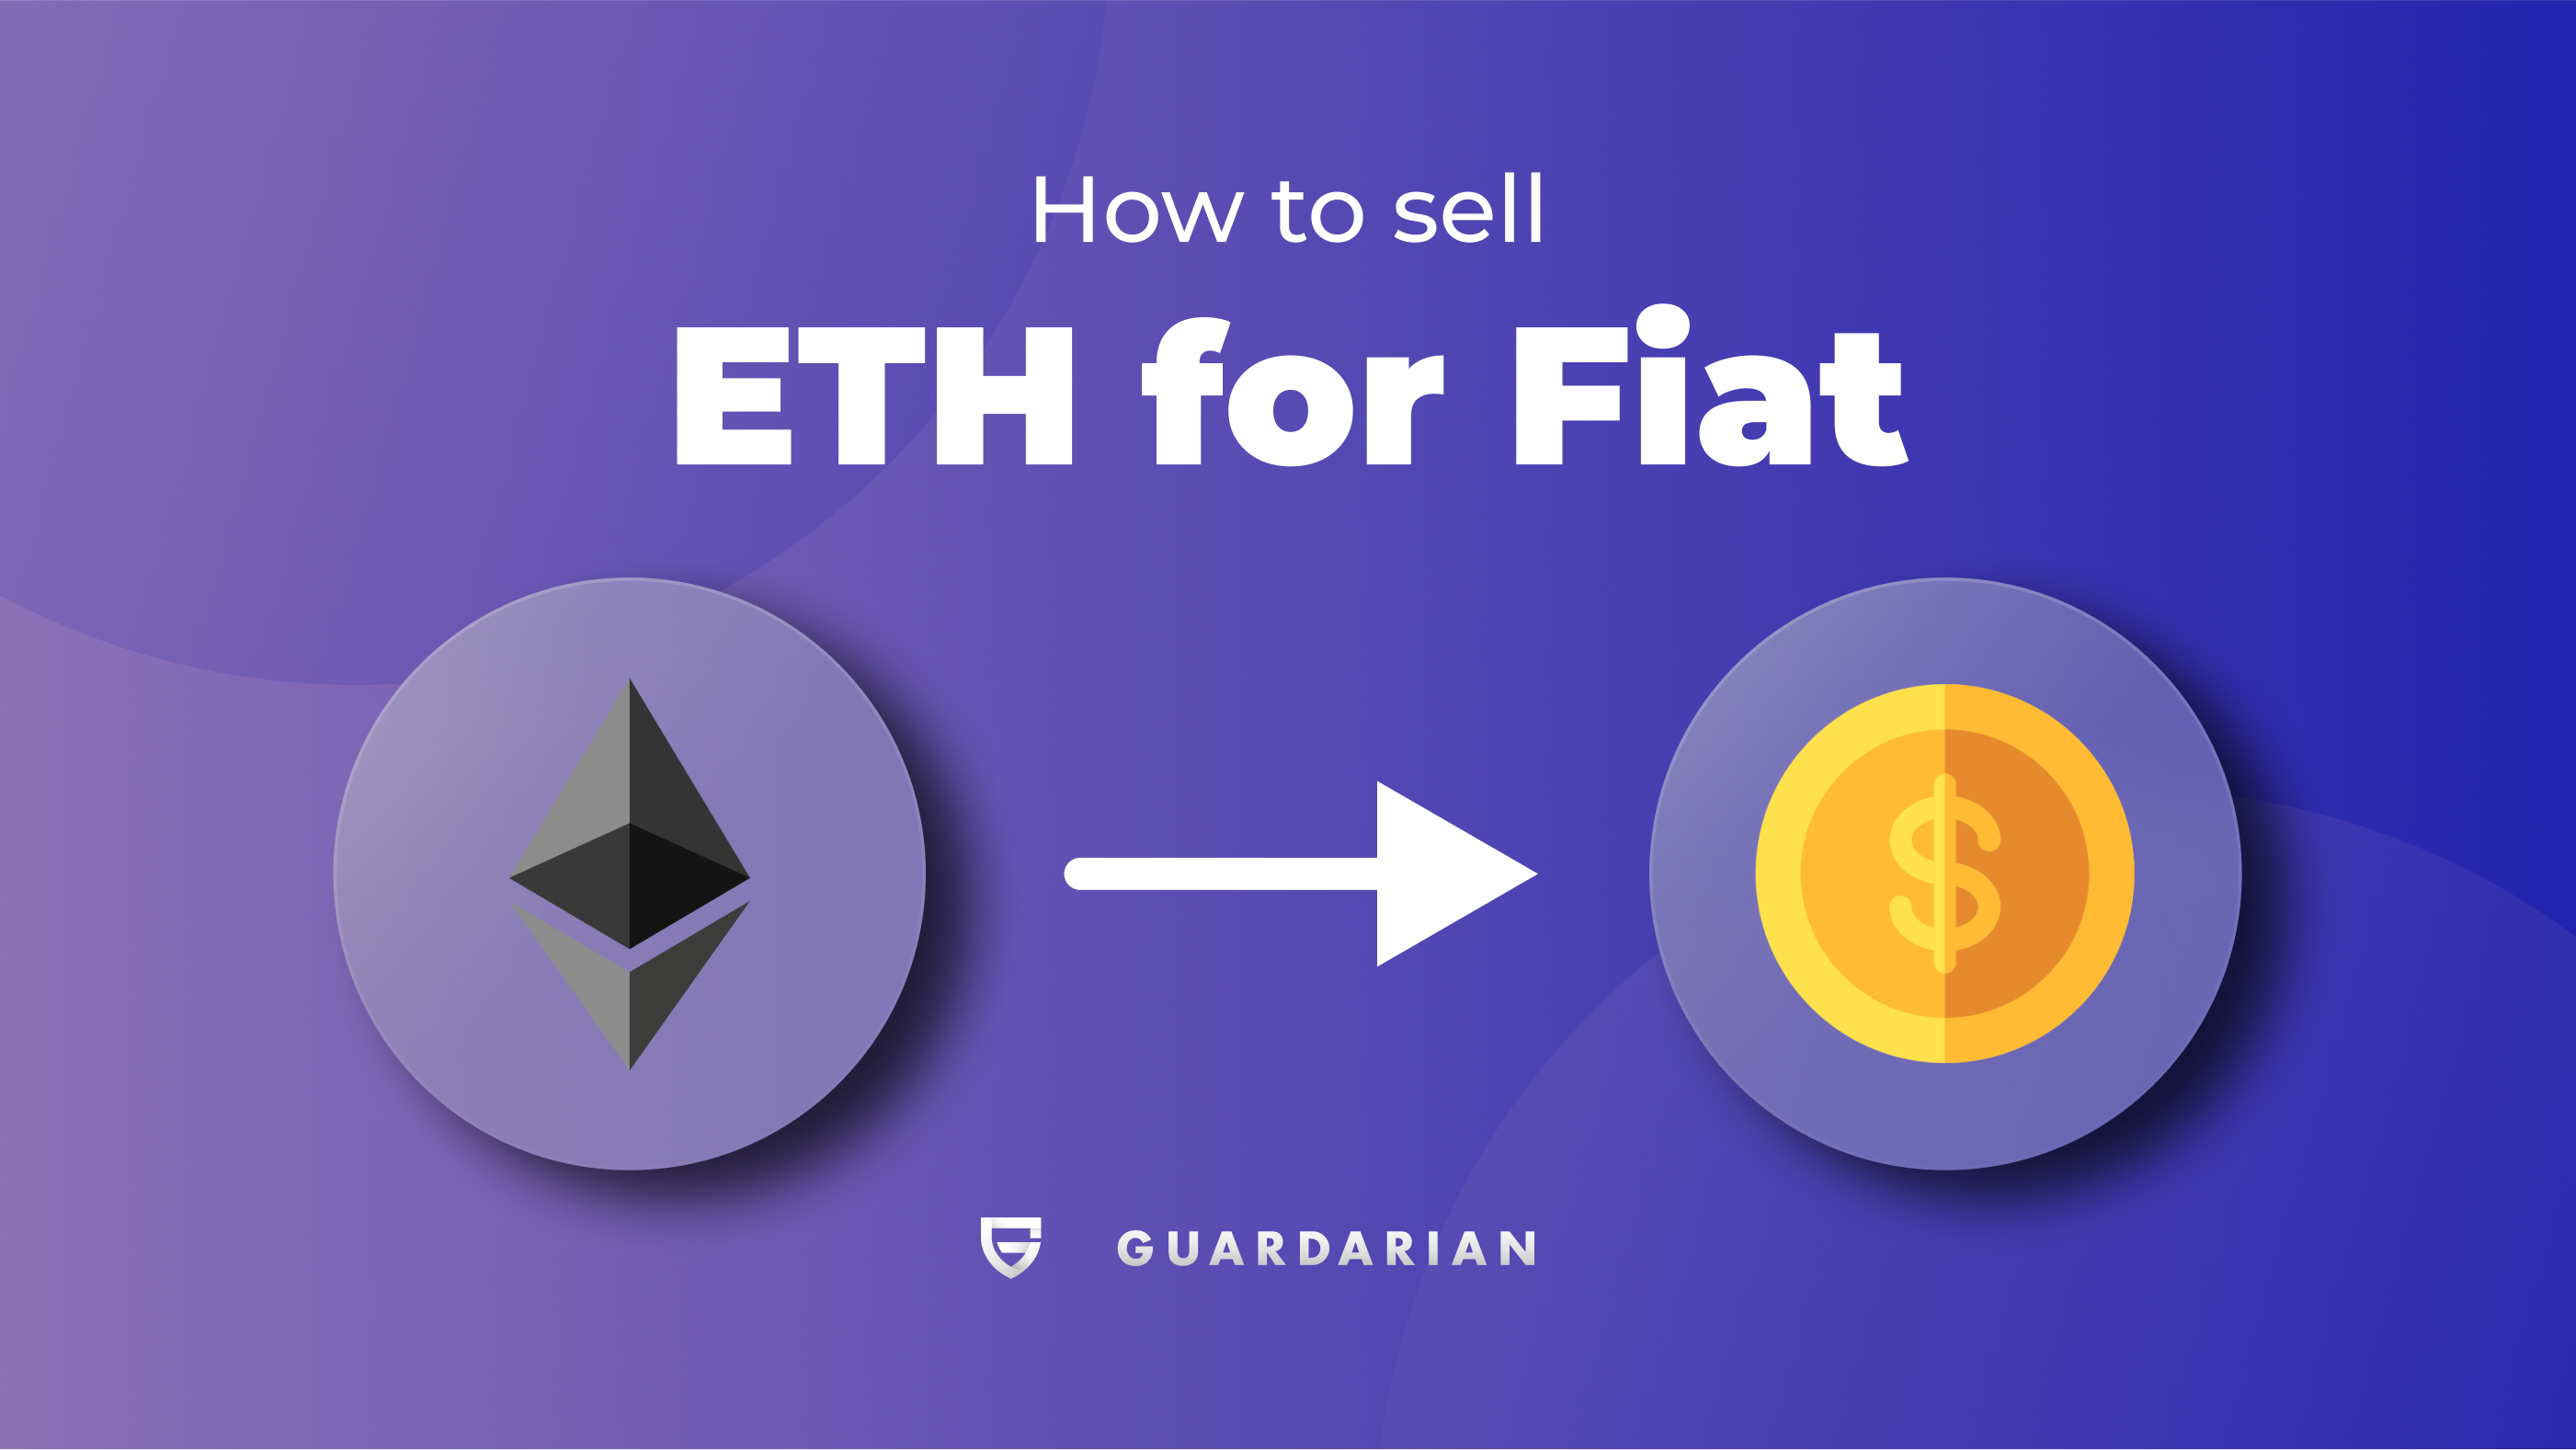 How to Sell Ethereum (ETH) for Fiat – Step-by-Step Guide